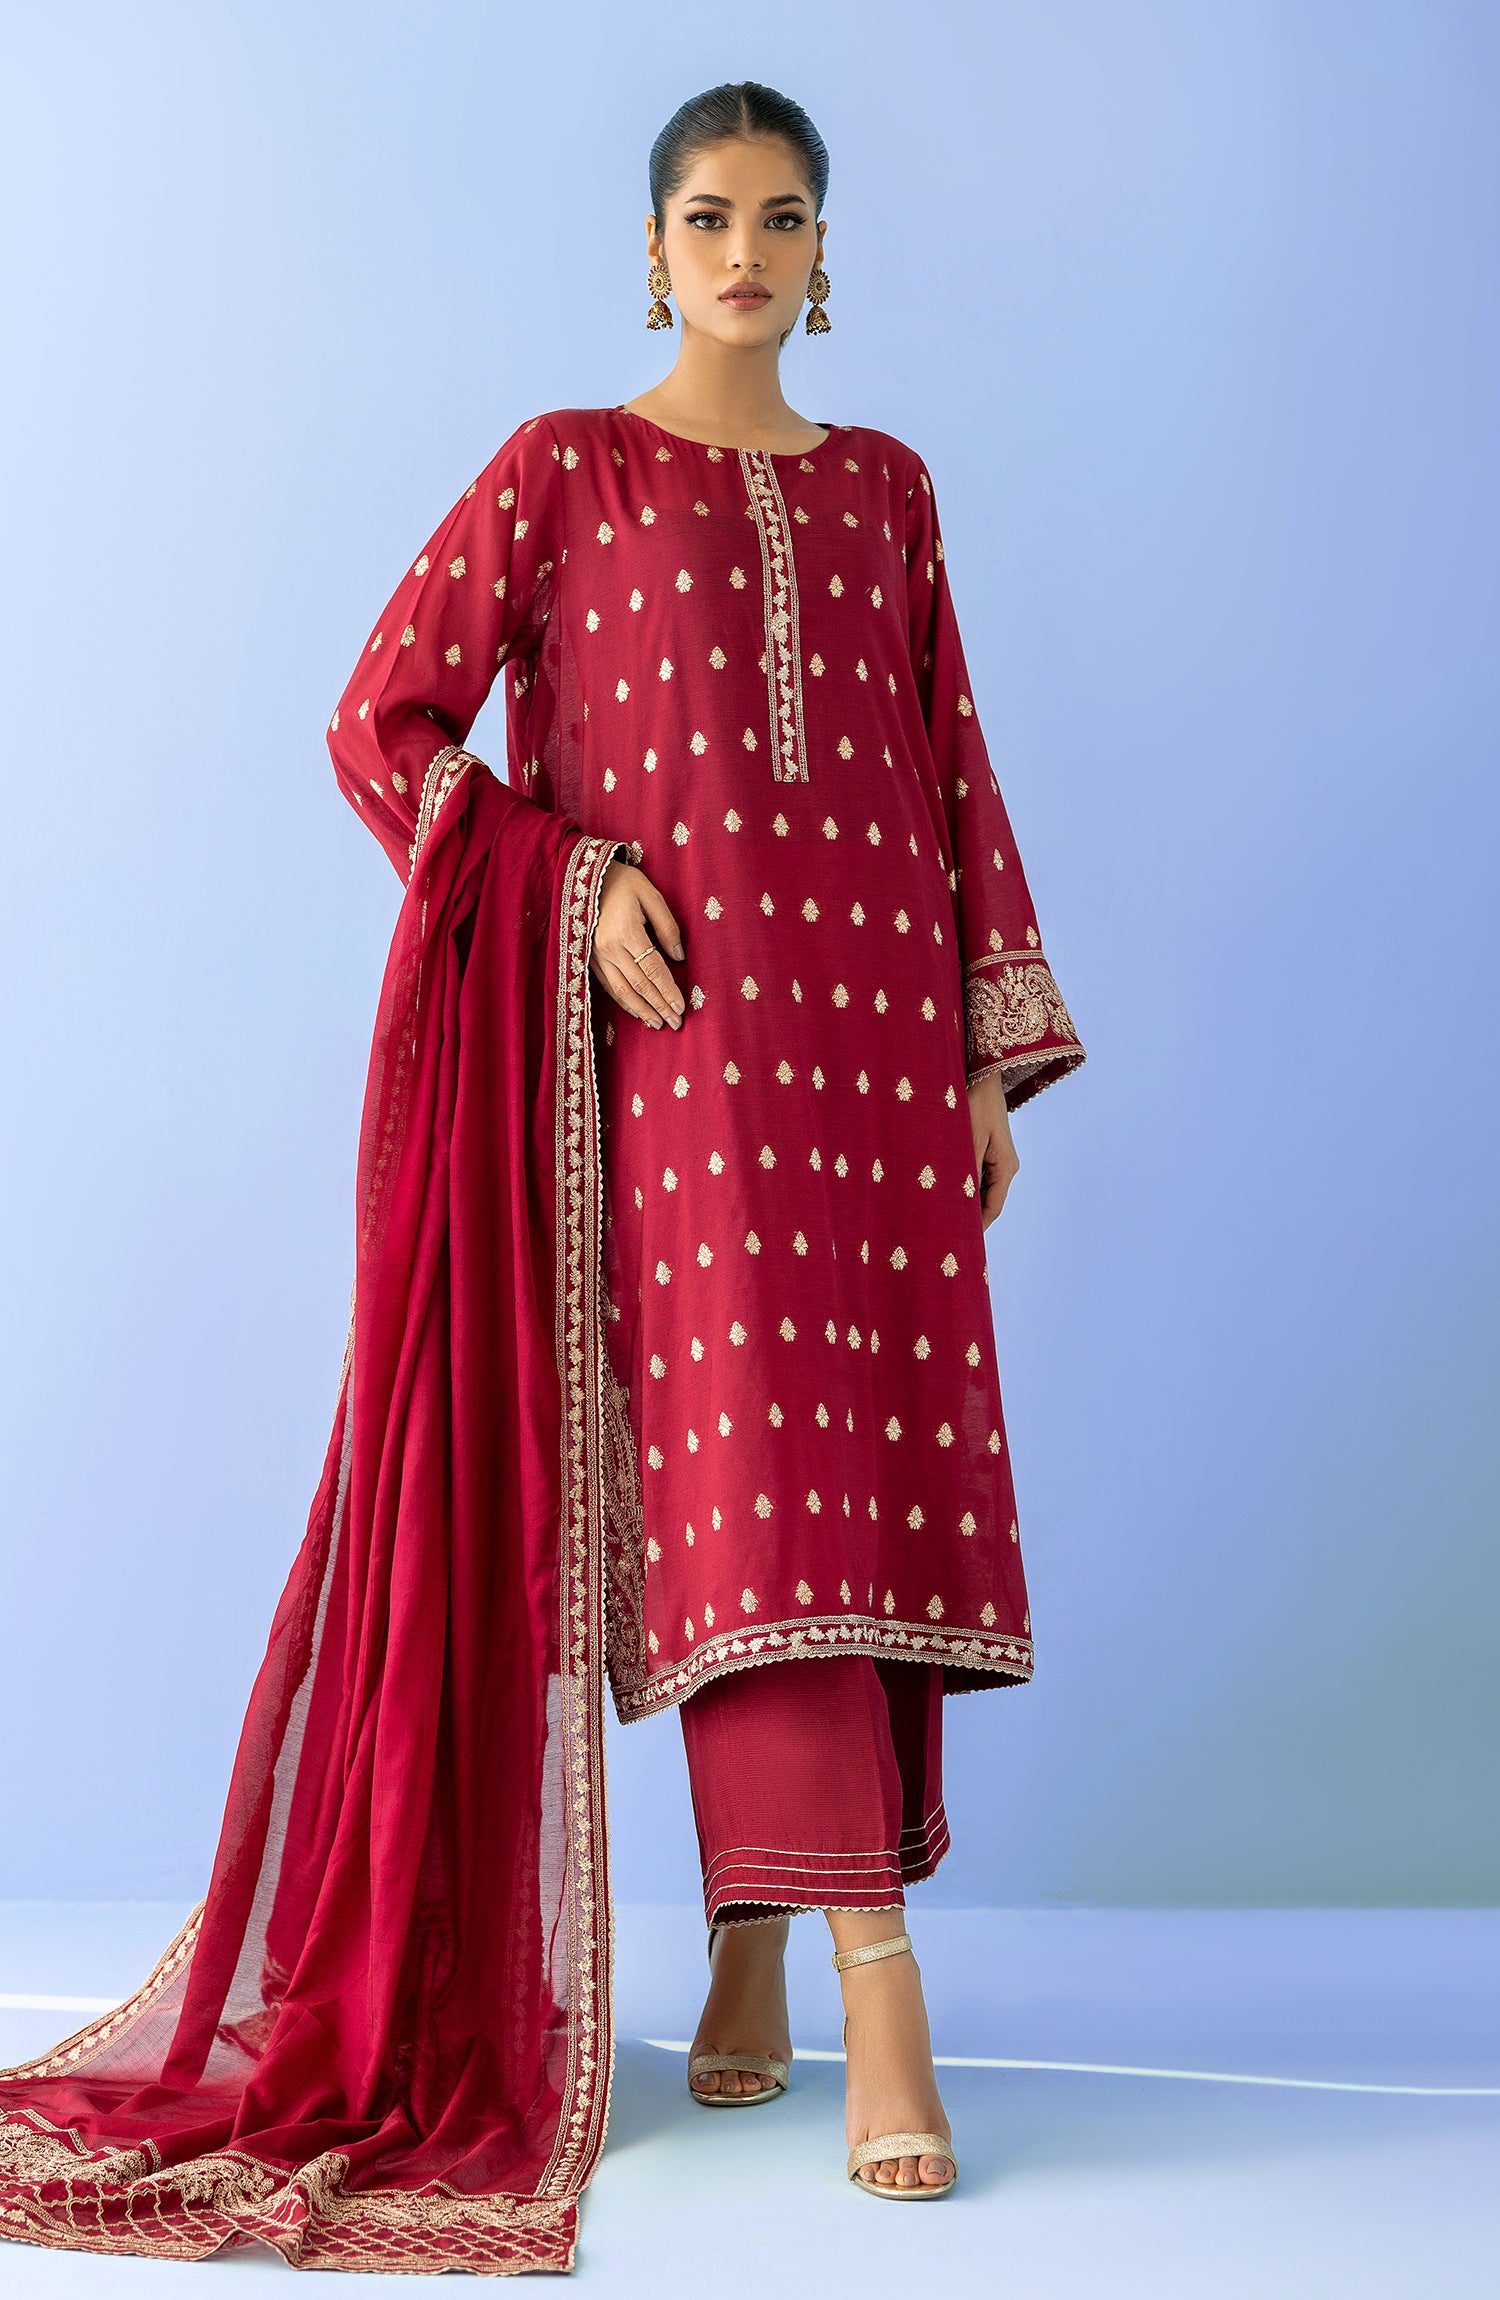 Unstitched 3 Piece Embroidered Jacquard Shirt , Raw Silk Pant and Raw Silk Dupatta